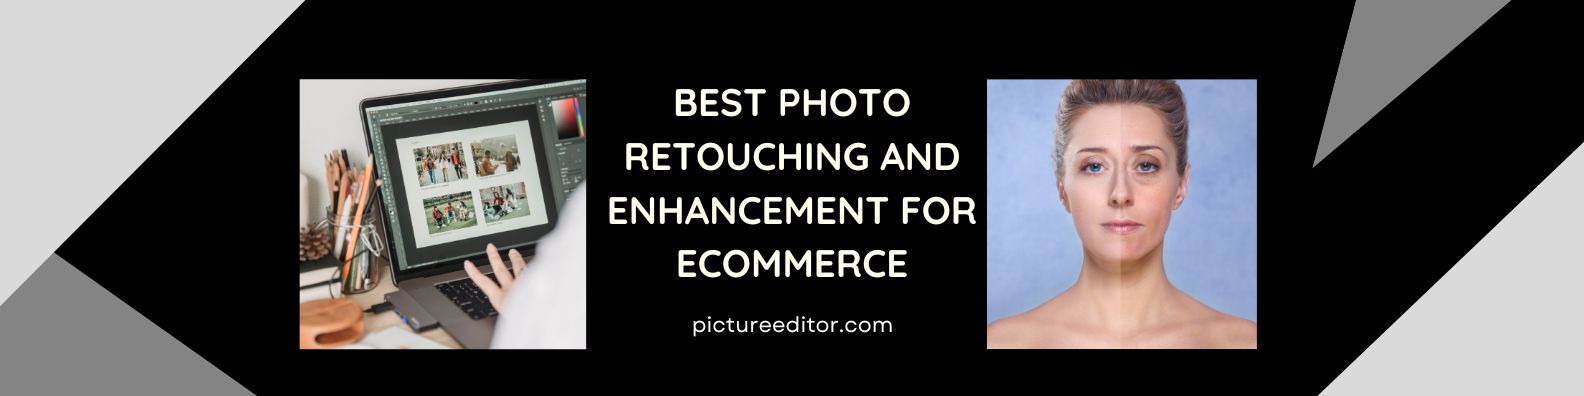 Best Photo Retouching And Enhancement for eCommerce